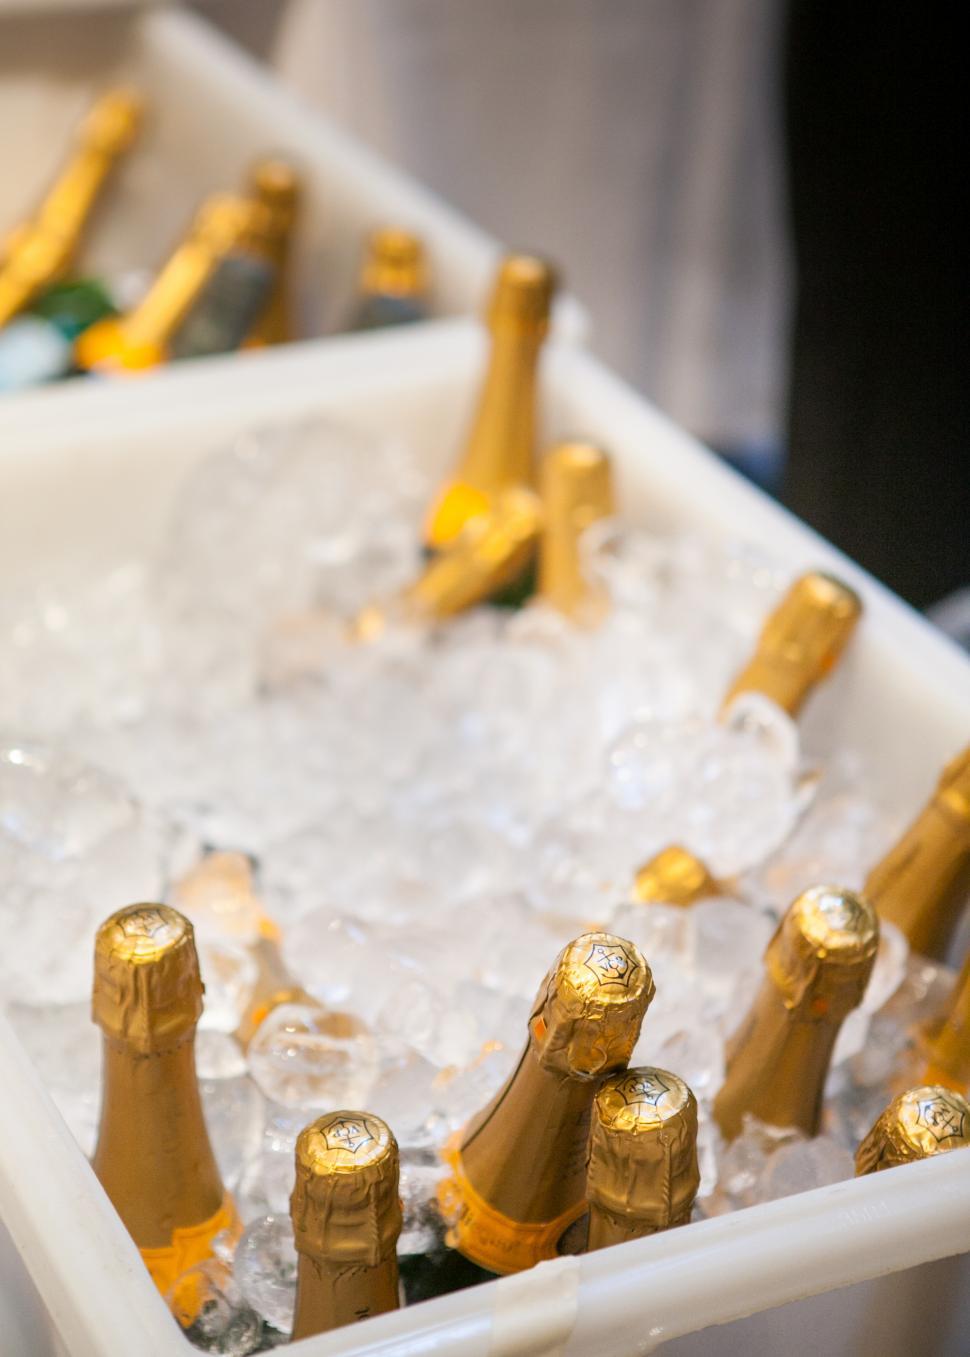 Free Image of Champagne bottles and ice 